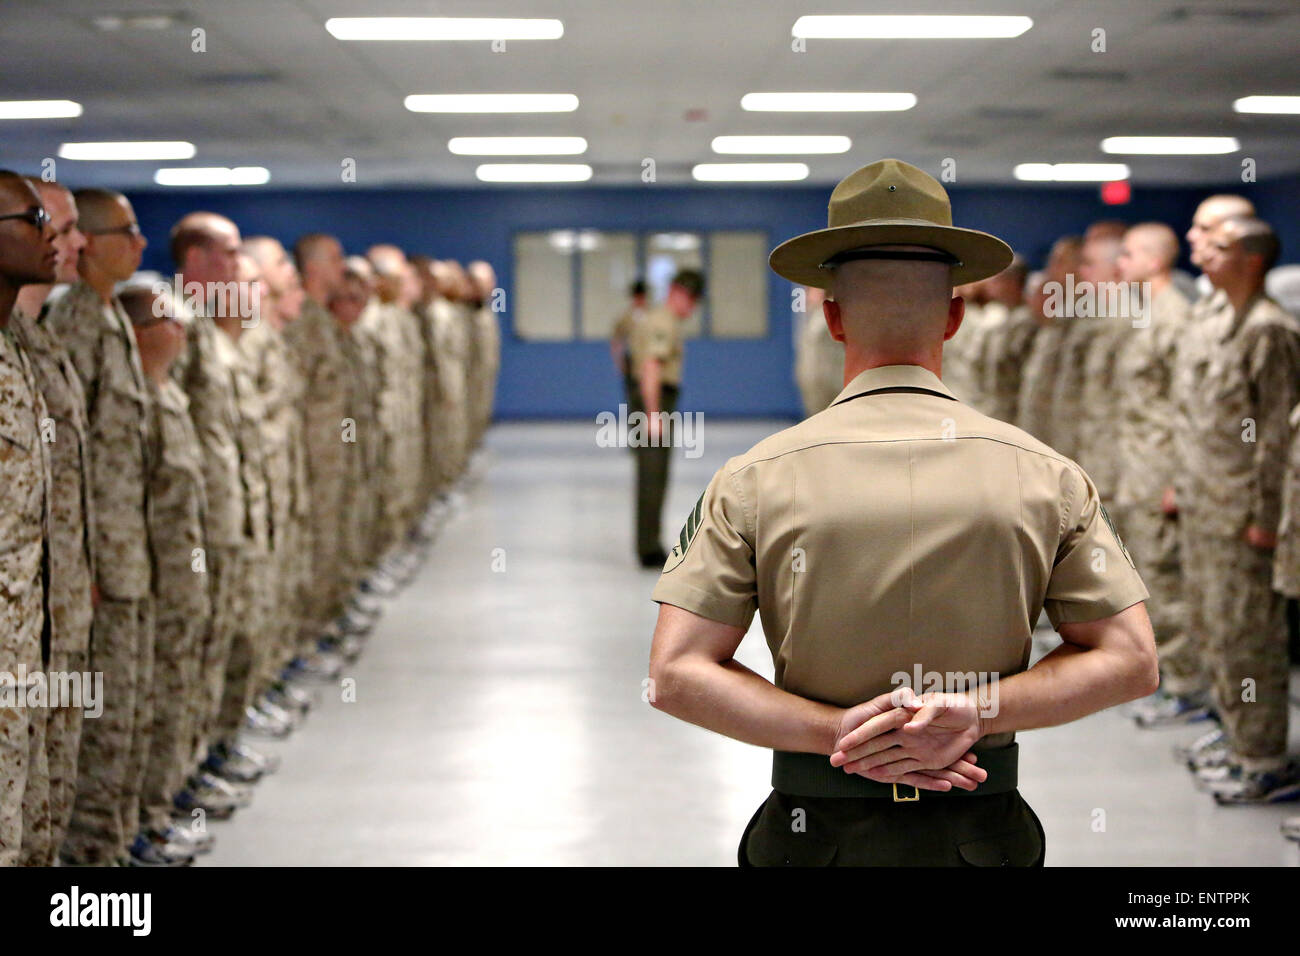 A US Marine Corps drill instructor yells at new recruits during training October 26, 2013 on Parris Island, S.C.  This was the first time the recruits met the Marine Corps drill instructors who would train them for the next 12 weeks. Stock Photo